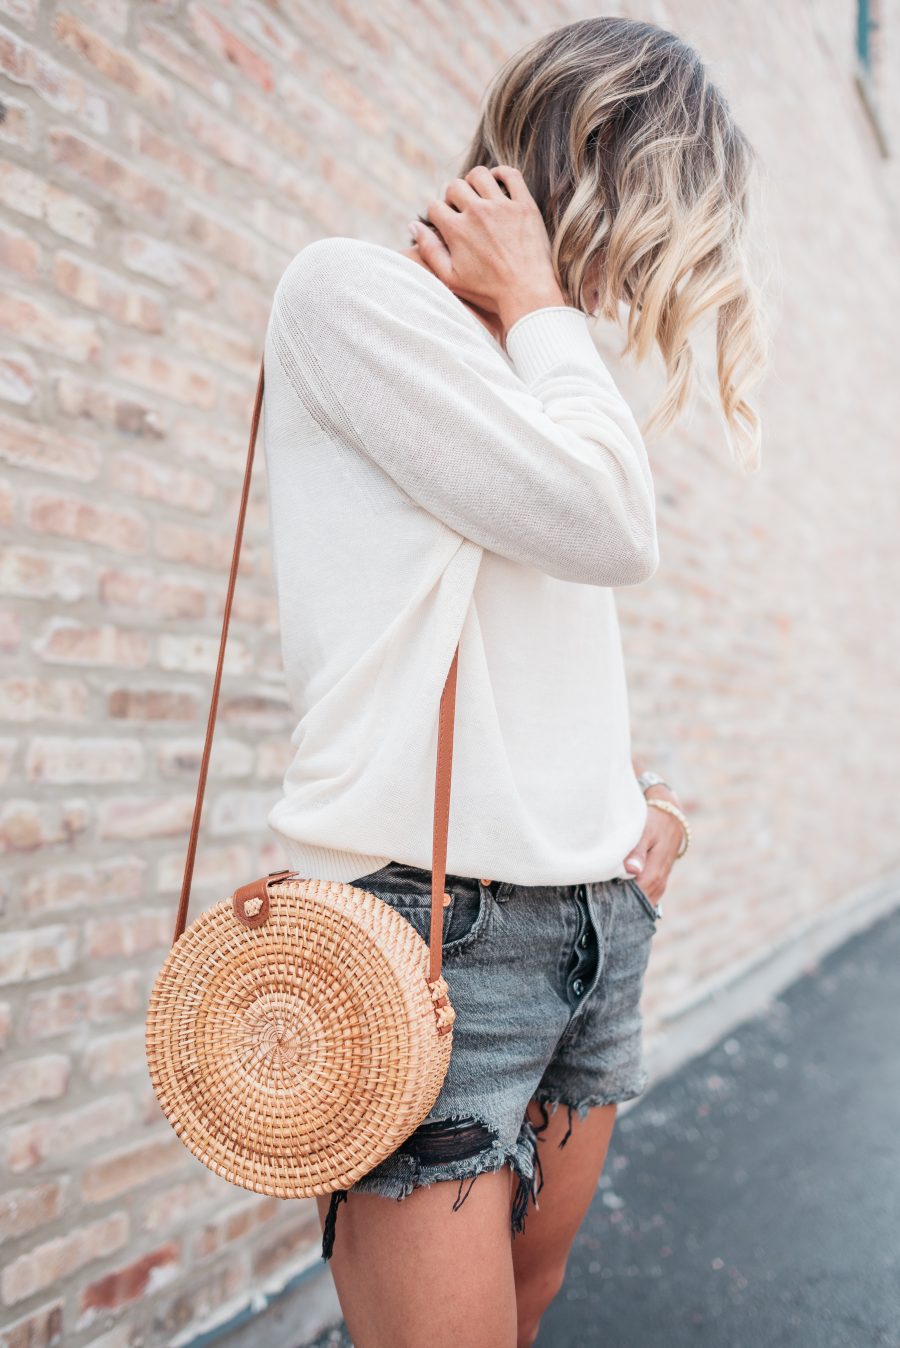 White long sleeve tee, black cut offs, sandals, straw bag, and sunnies